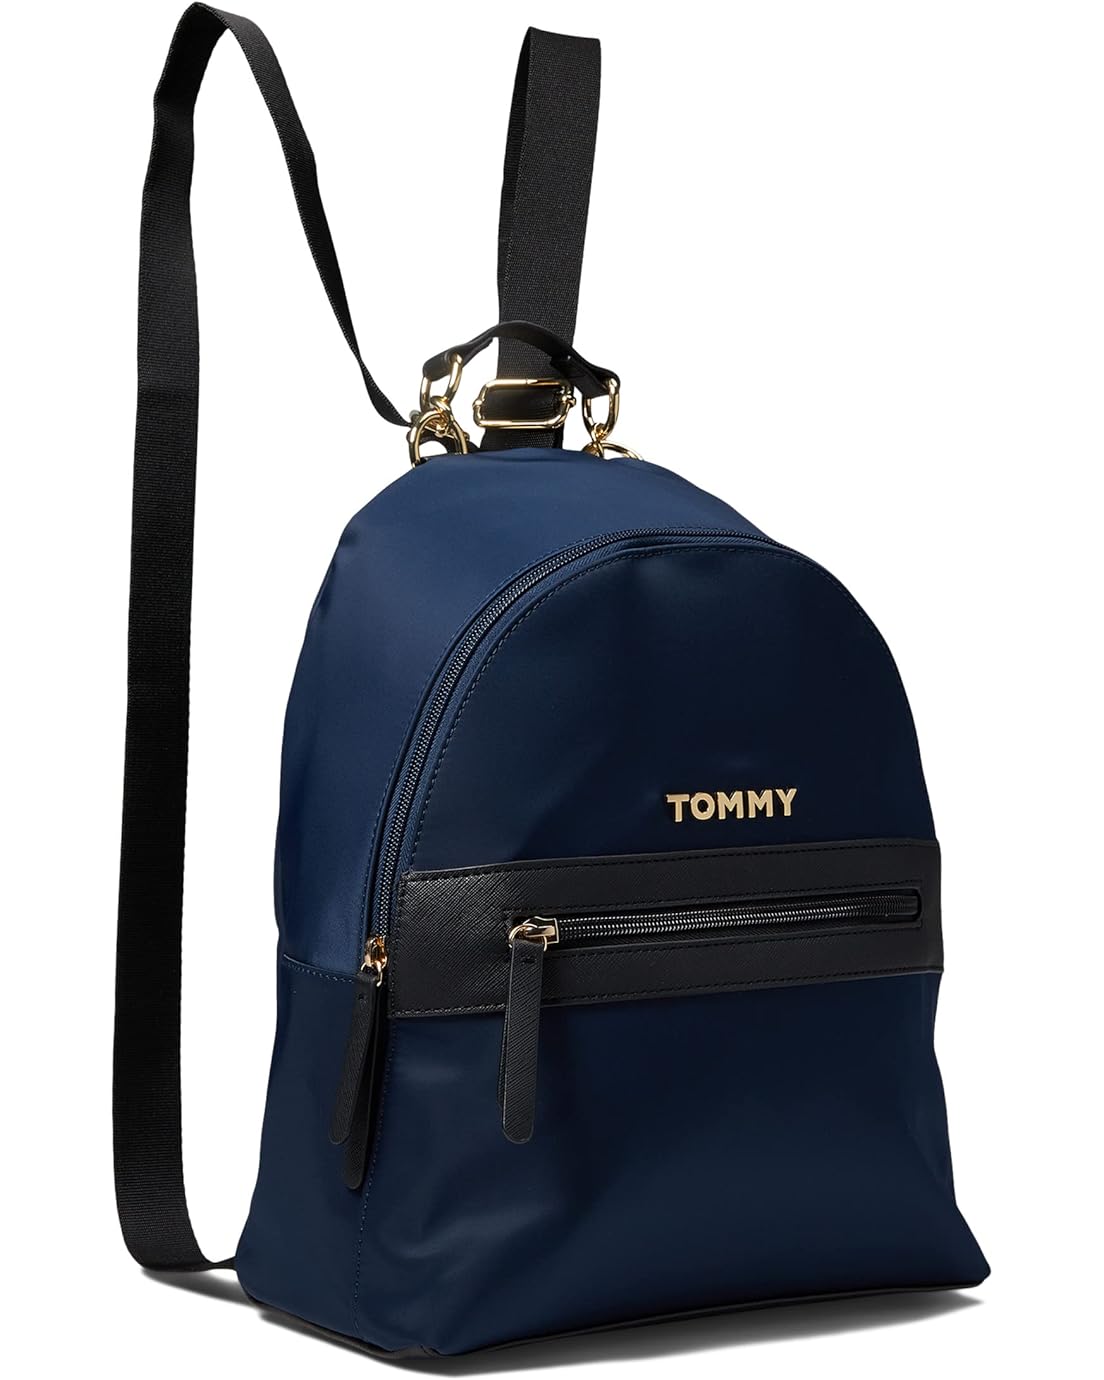 Tommy Hilfiger Kendall II Medium Dome Backpack-Smooth Nylon